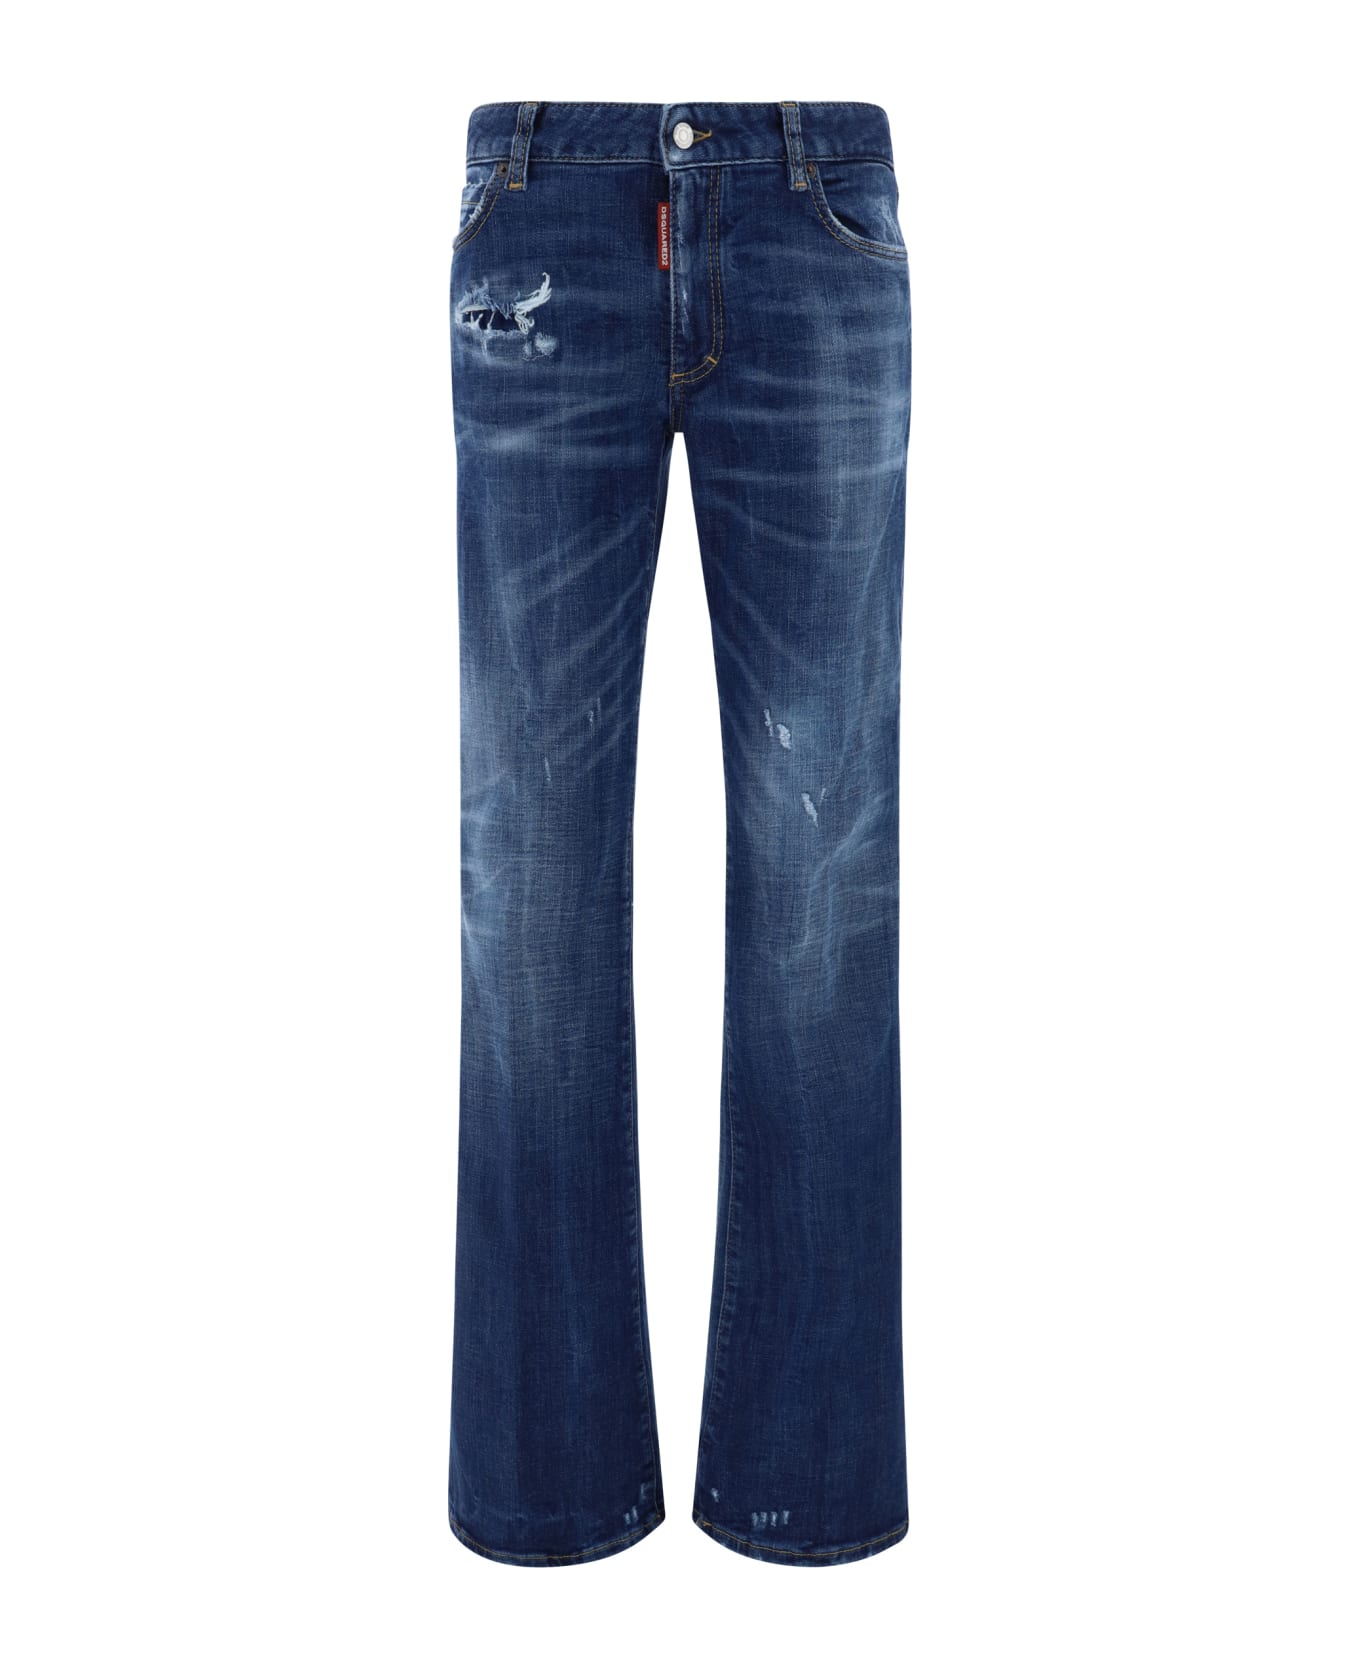 Dsquared2 Flare Jeans - Navy Blue